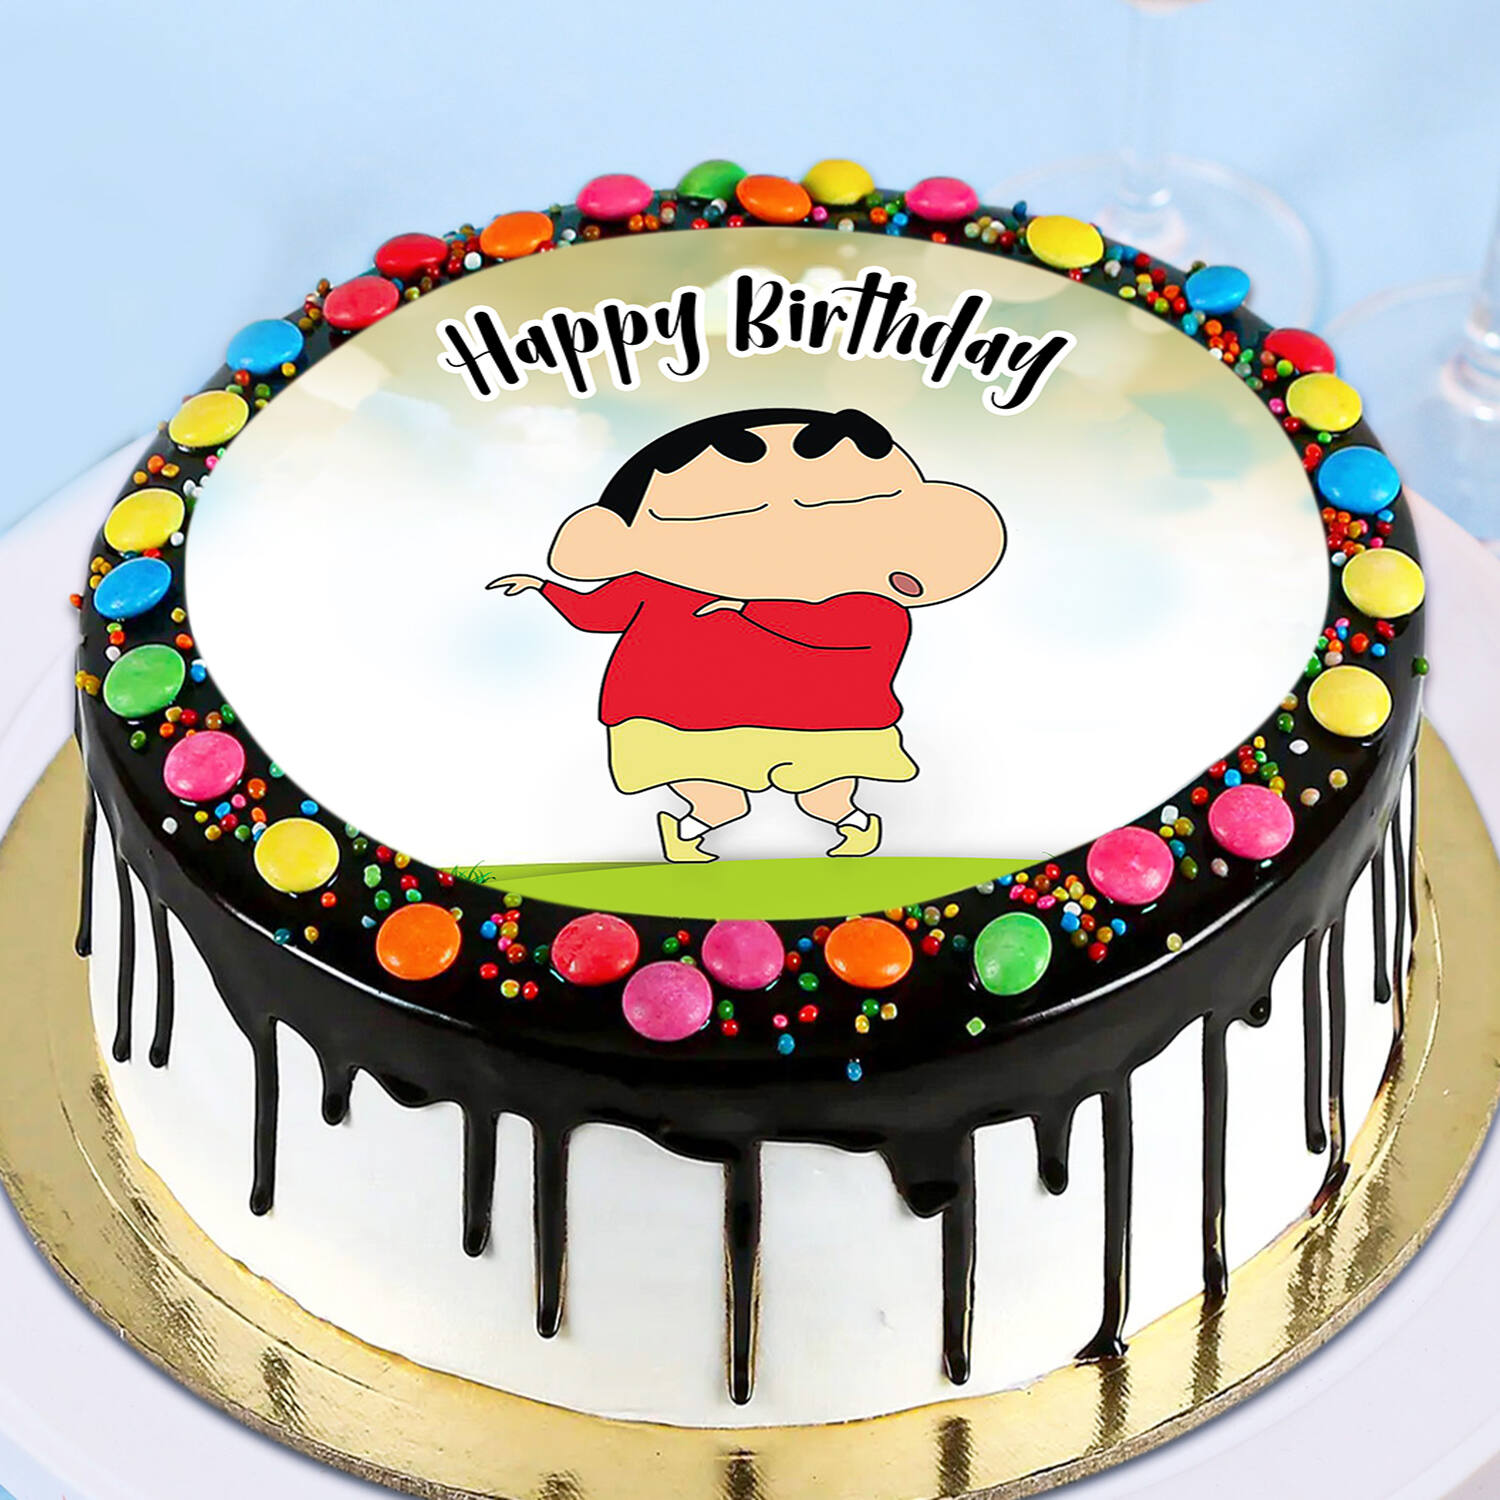 Sweetooth Fairy - A simple Belgium chocolate cake topped with the birthday  girl's favourite cartoon Shin Chan made out of fondant 😋  —————————————————————— #shinchan #fondantaccents #homemadewithlove  #belgiumchocolate #callebaut #birthdaycake ...